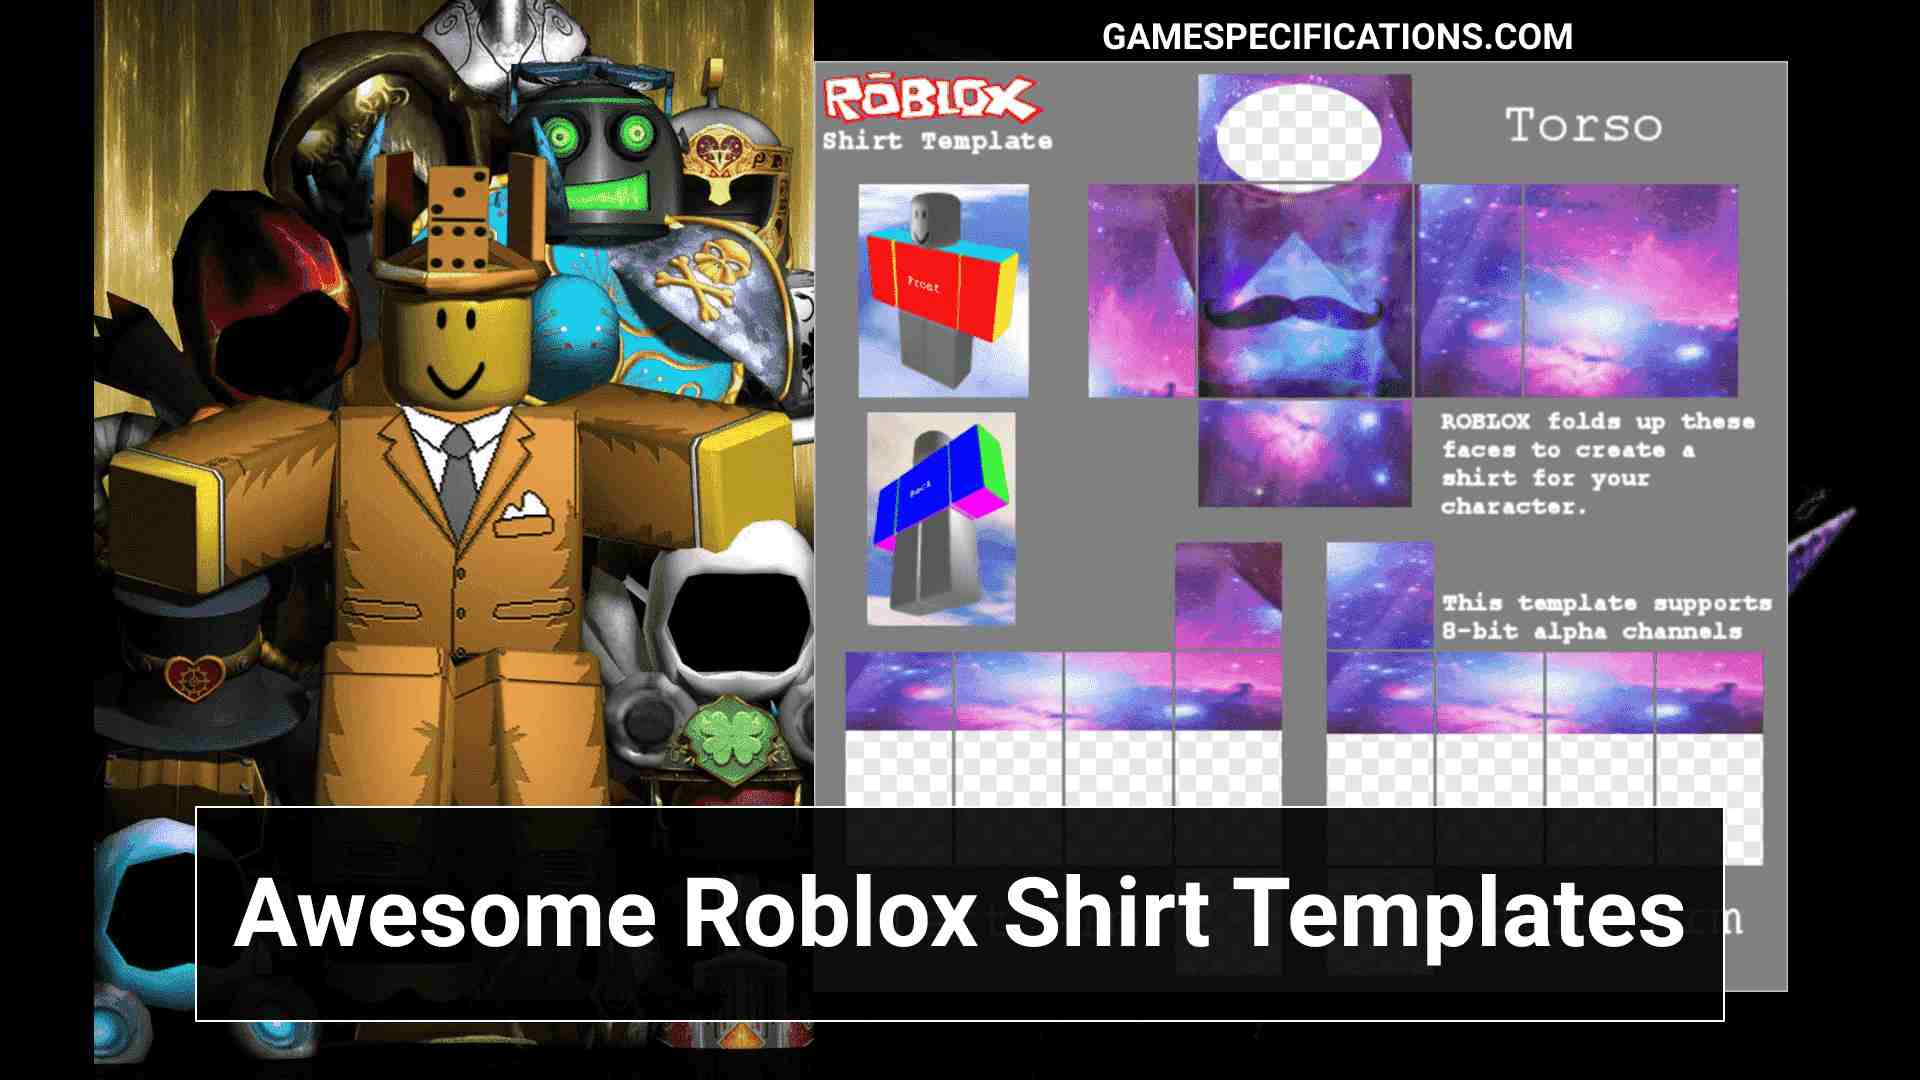 25 Coolest Roblox Shirt Templates Proved To Be The Best Game Specifications - roblox shirt template images